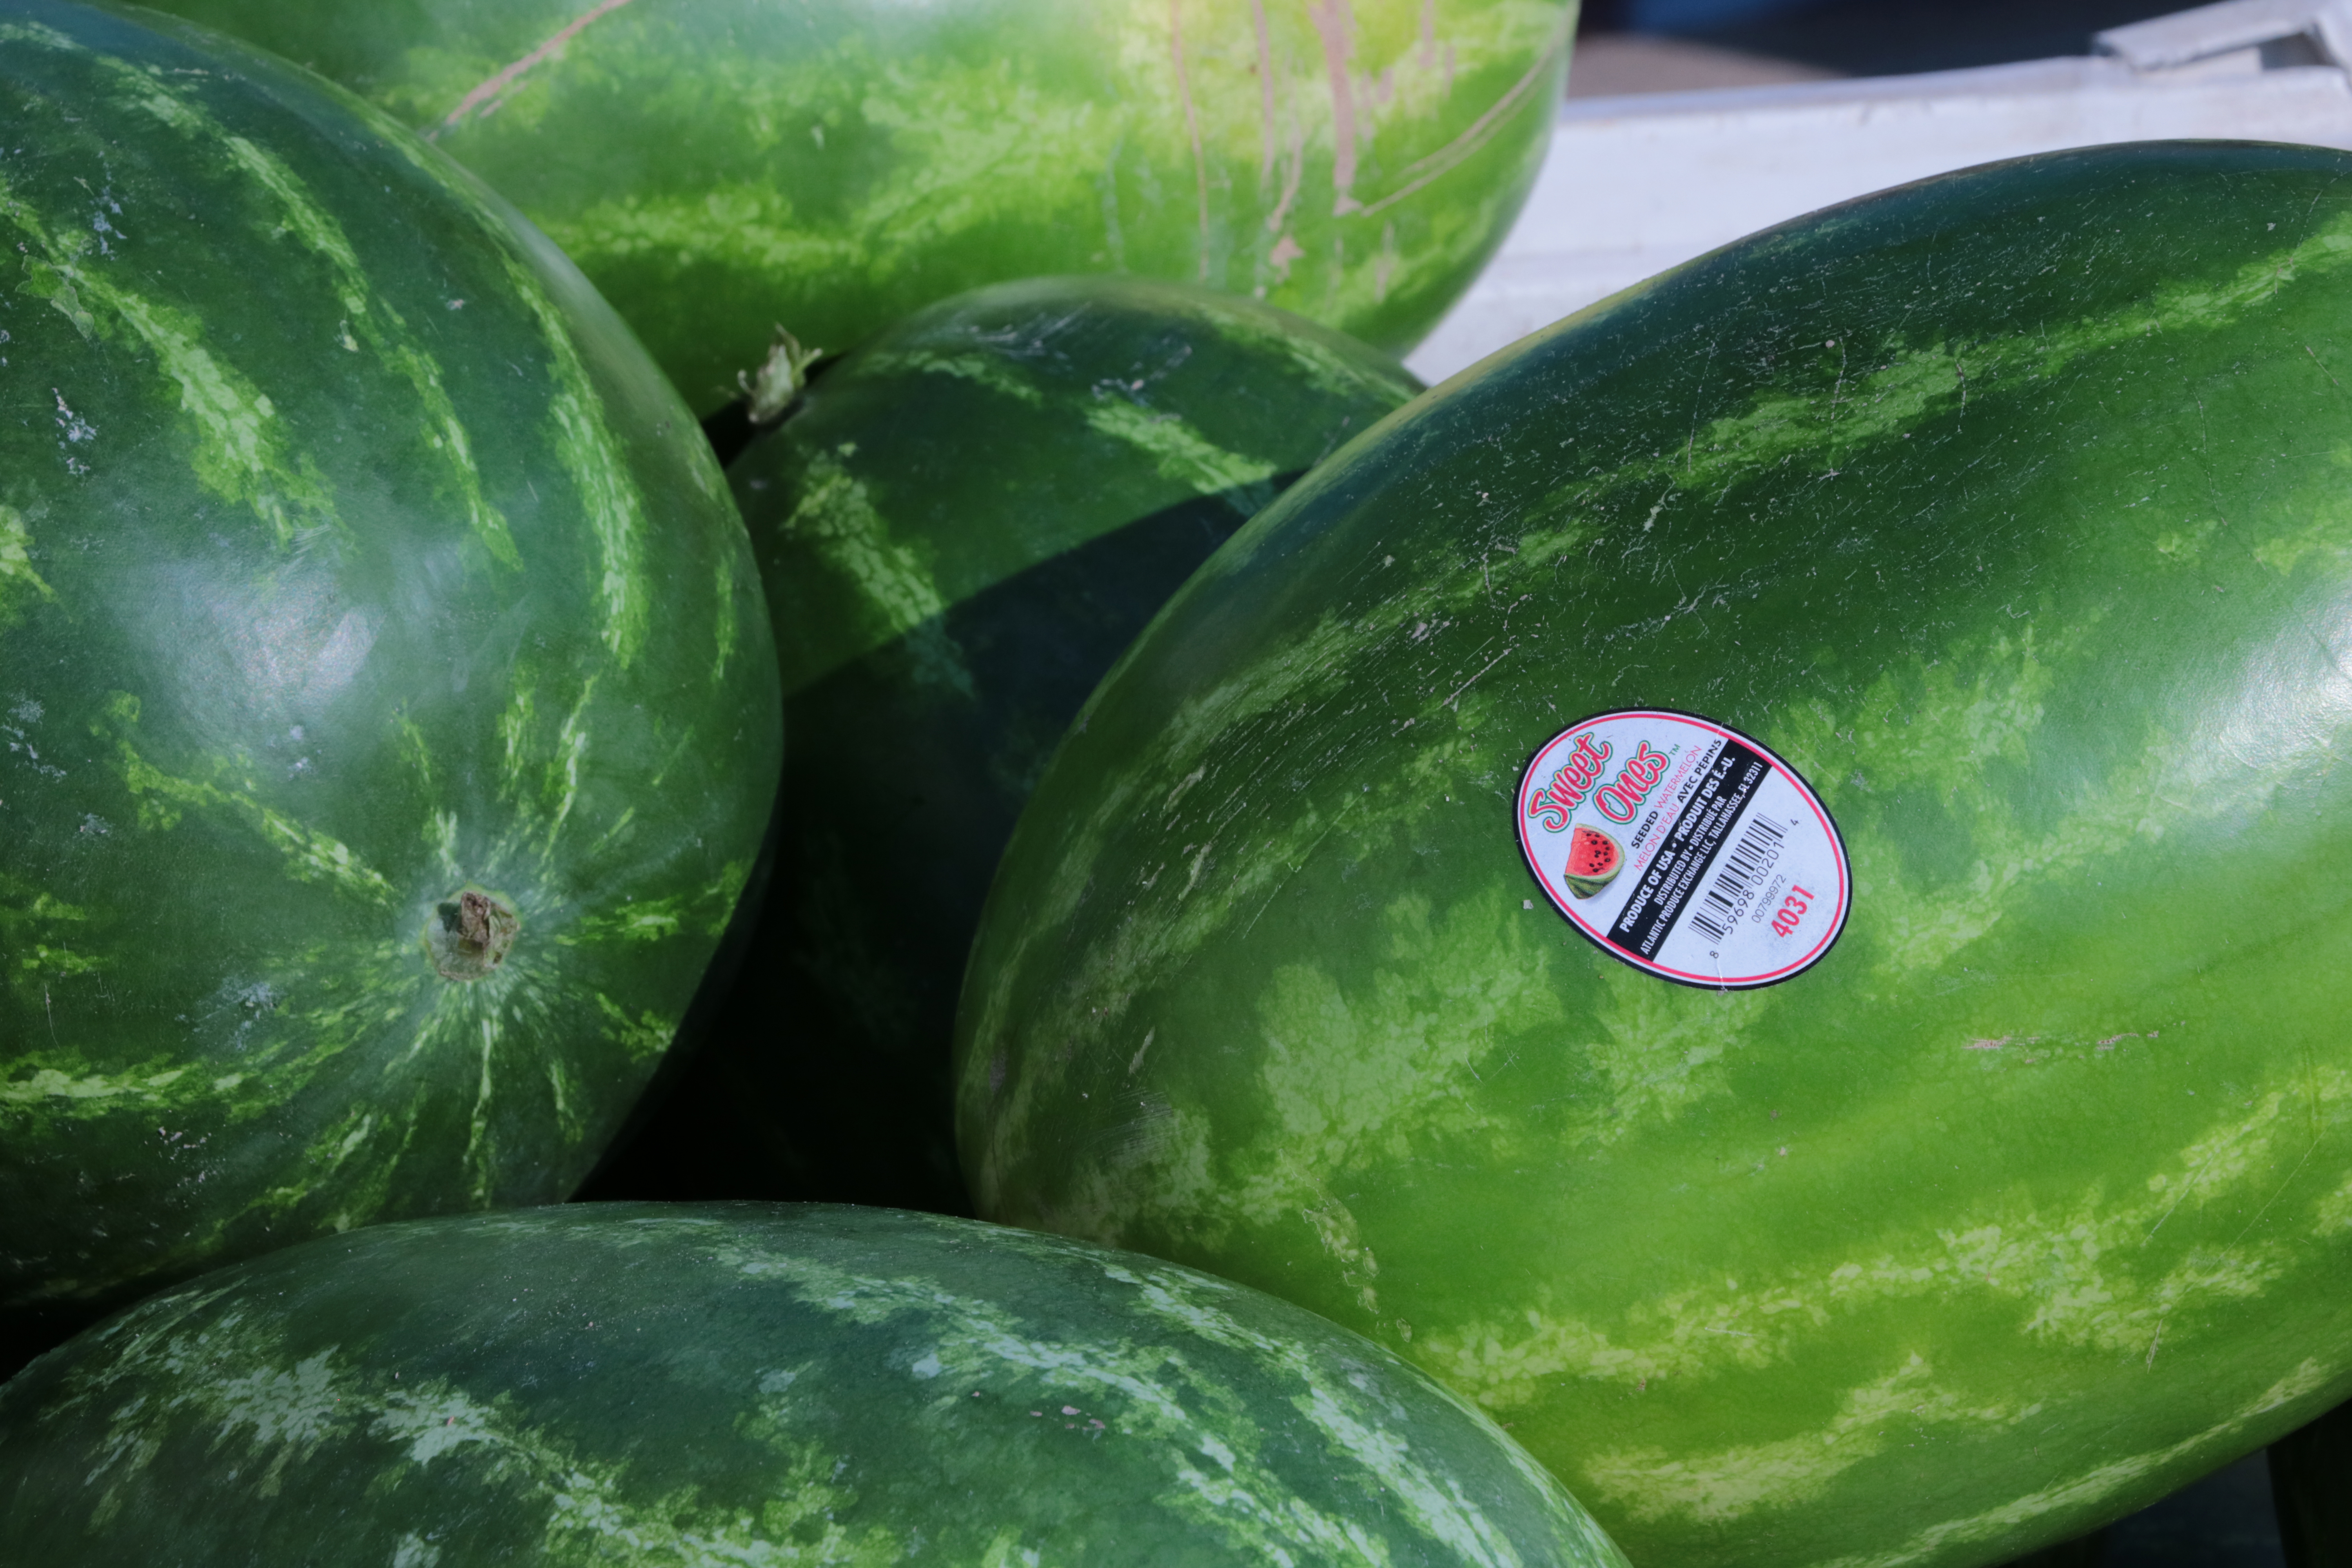 Once the melons are labeled, they are loaded into crates that will be shipped to retailers across the country.